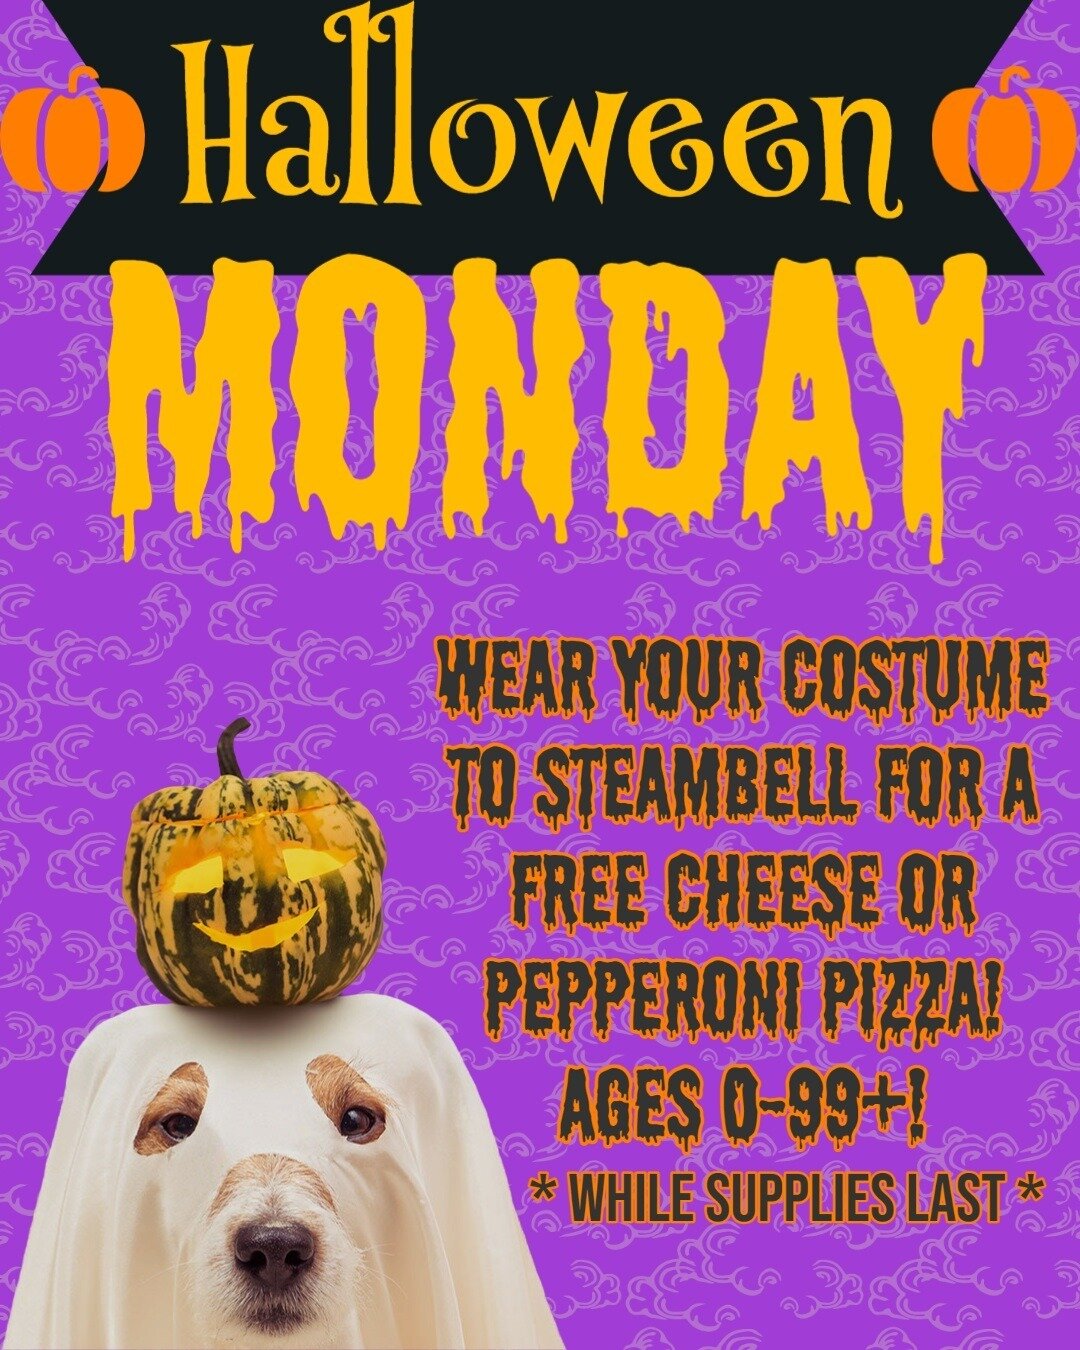 Come out to Steam Bell this evening to kick off Halloween with us! Wear your costume, and receive a free cheese or pepperoni flatbread (while supplies last!). We will have free candy available at the bar, and family friendly Halloween movies playing 